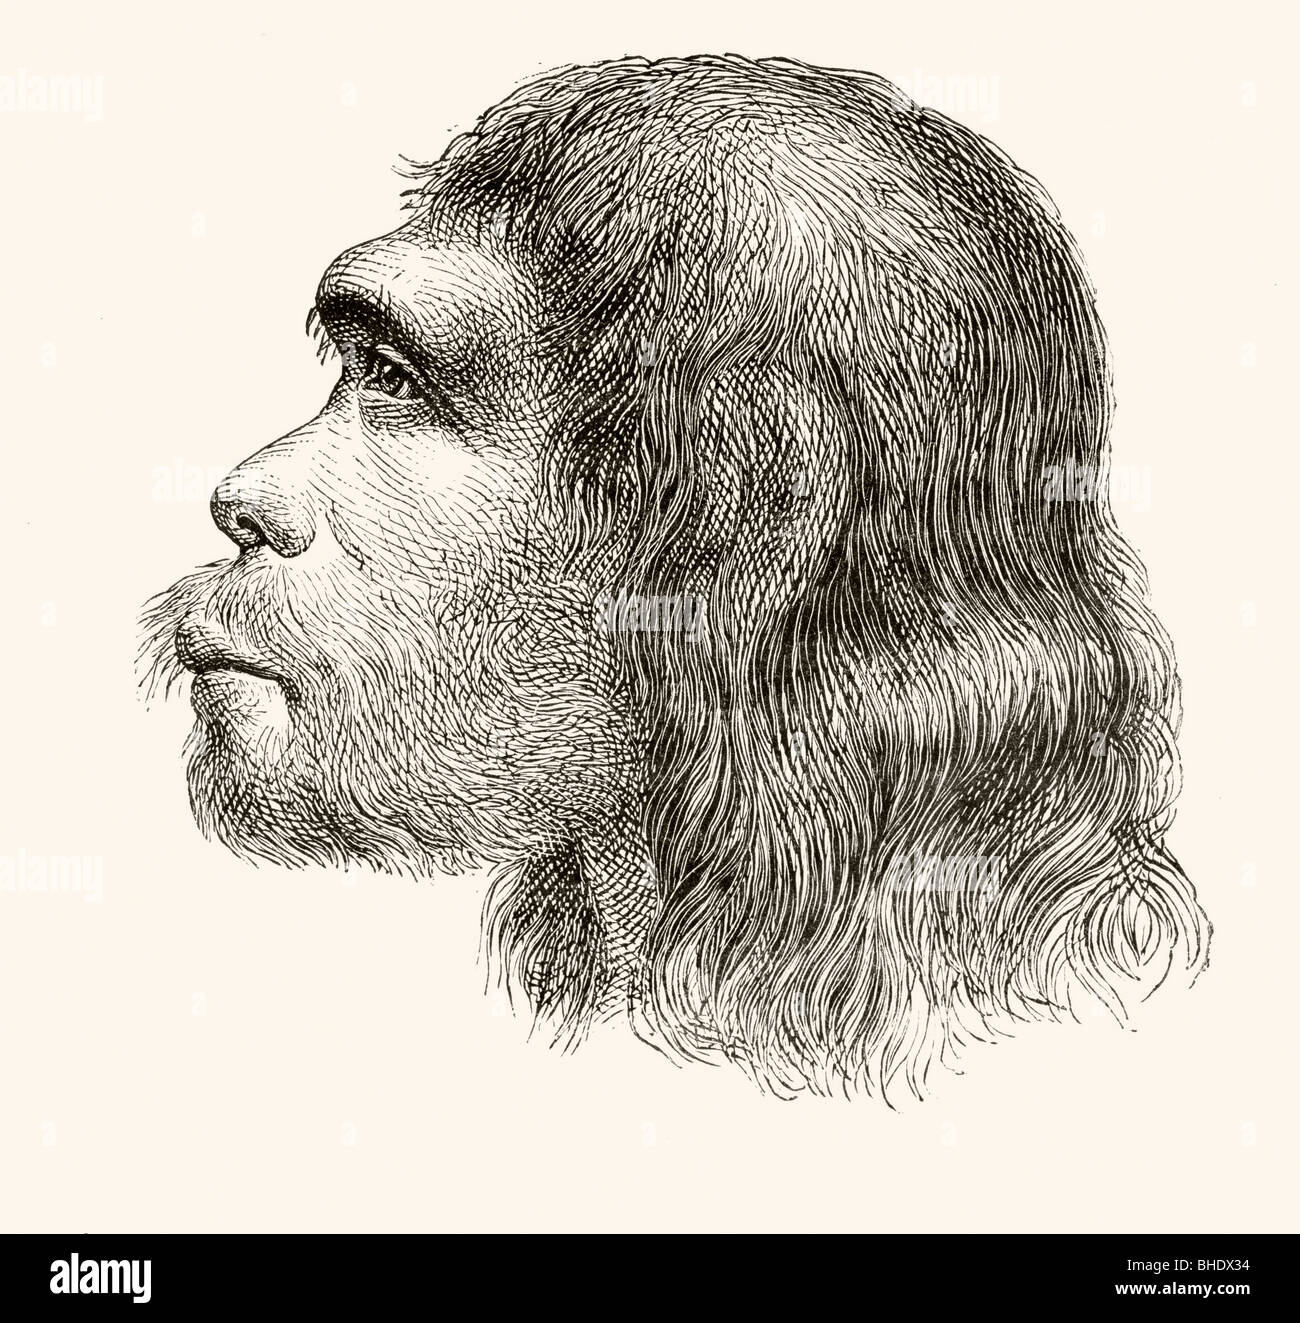 Head of a Neanderthal man. Illustration from a 19th century reconstruction. Stock Photo